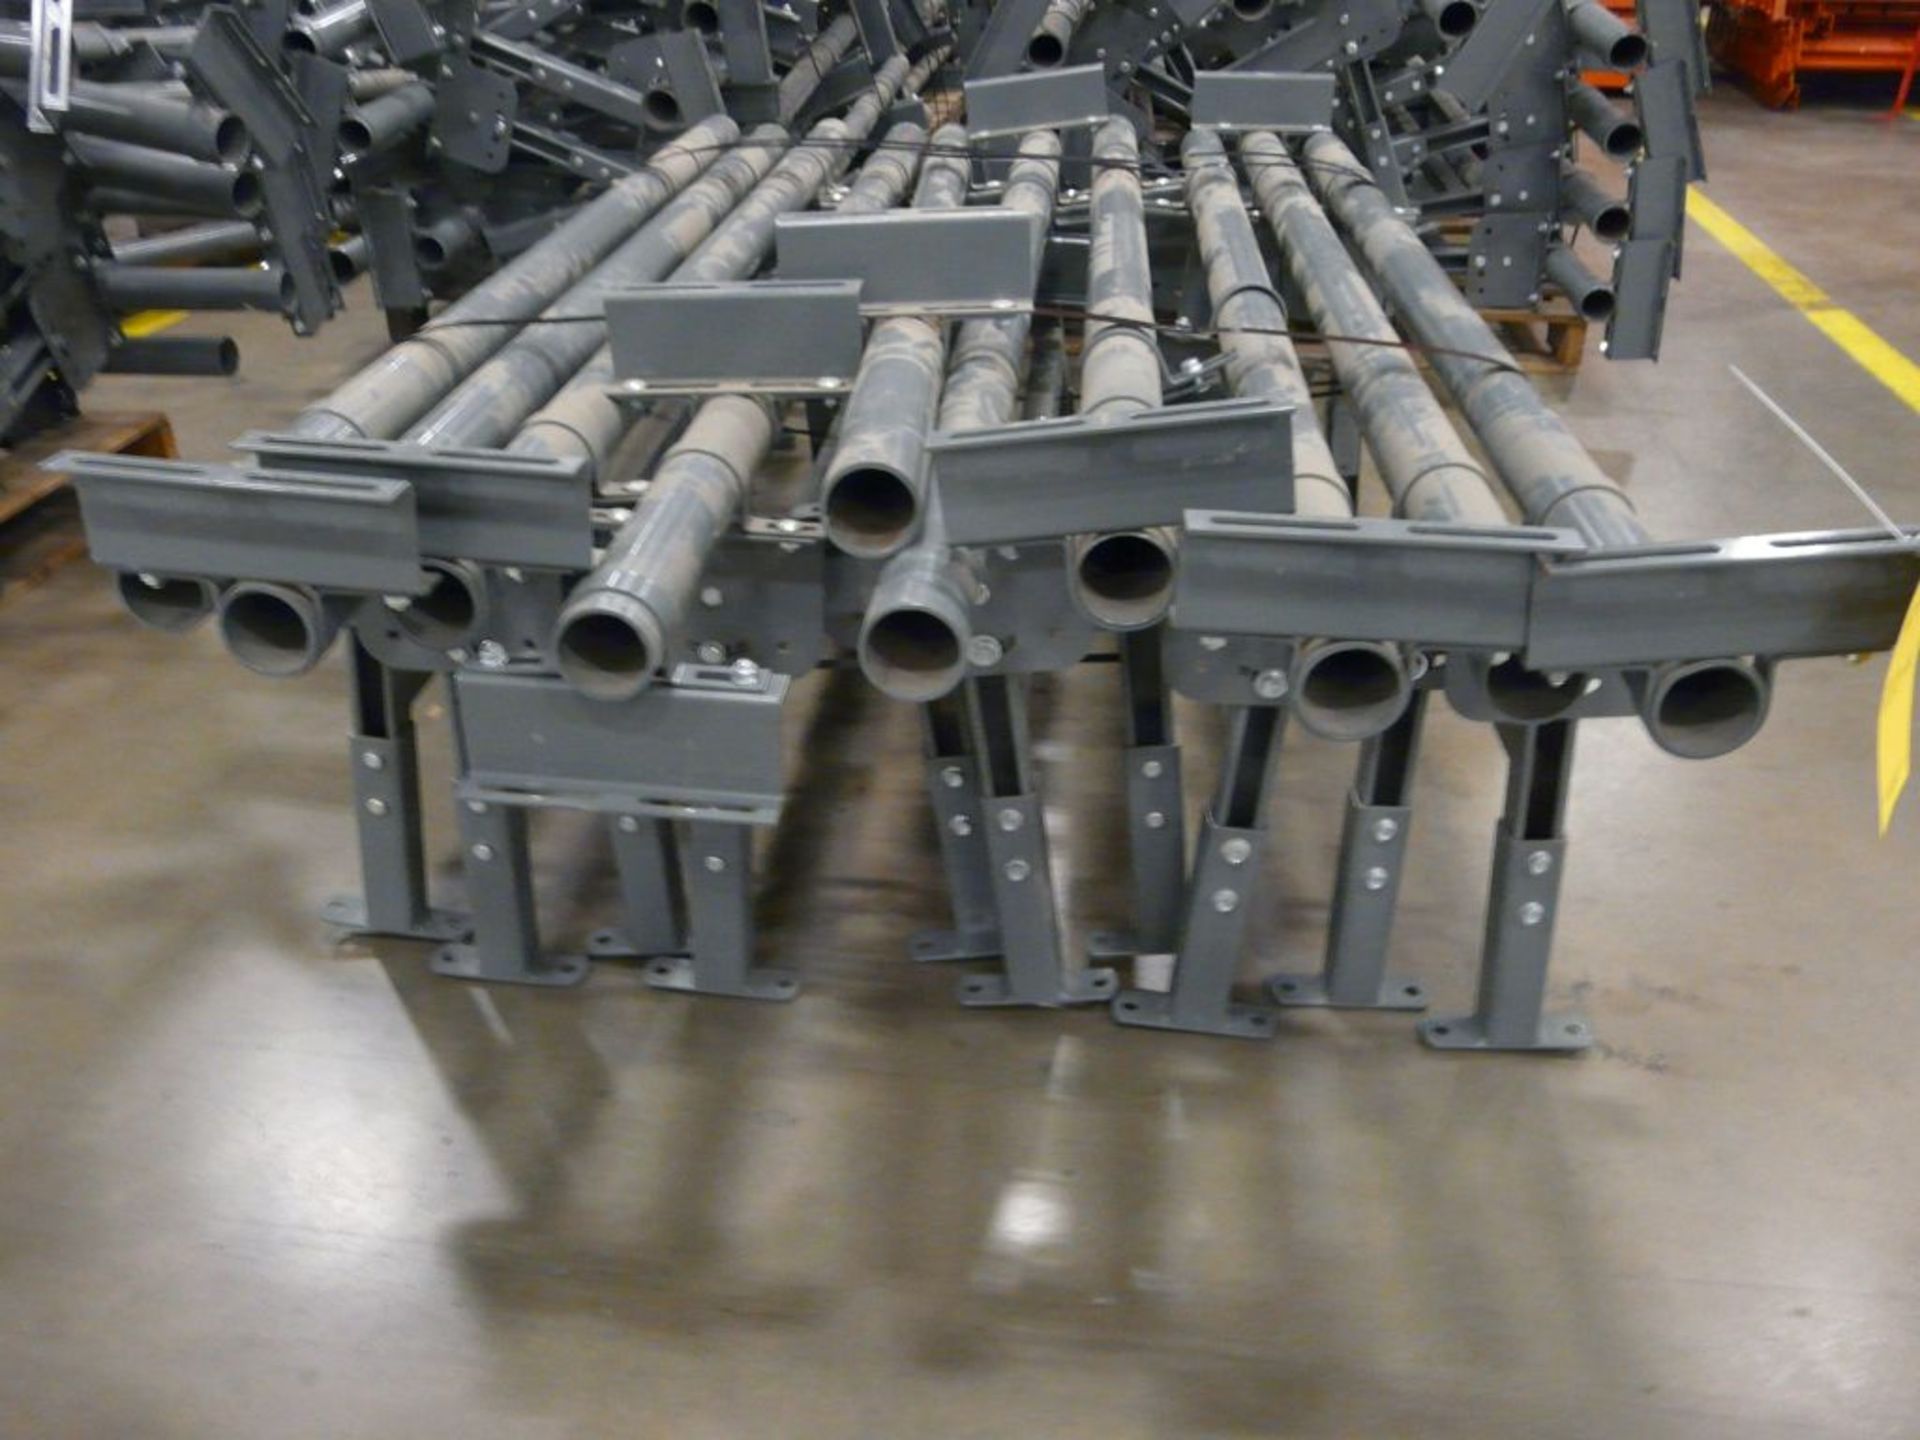 Lot of (5) USA Floor Supports - Brace: 71"L; Stand: 44"L x 19"H; Tag: 223840 - $30 Lot Loading Fee - Image 3 of 4